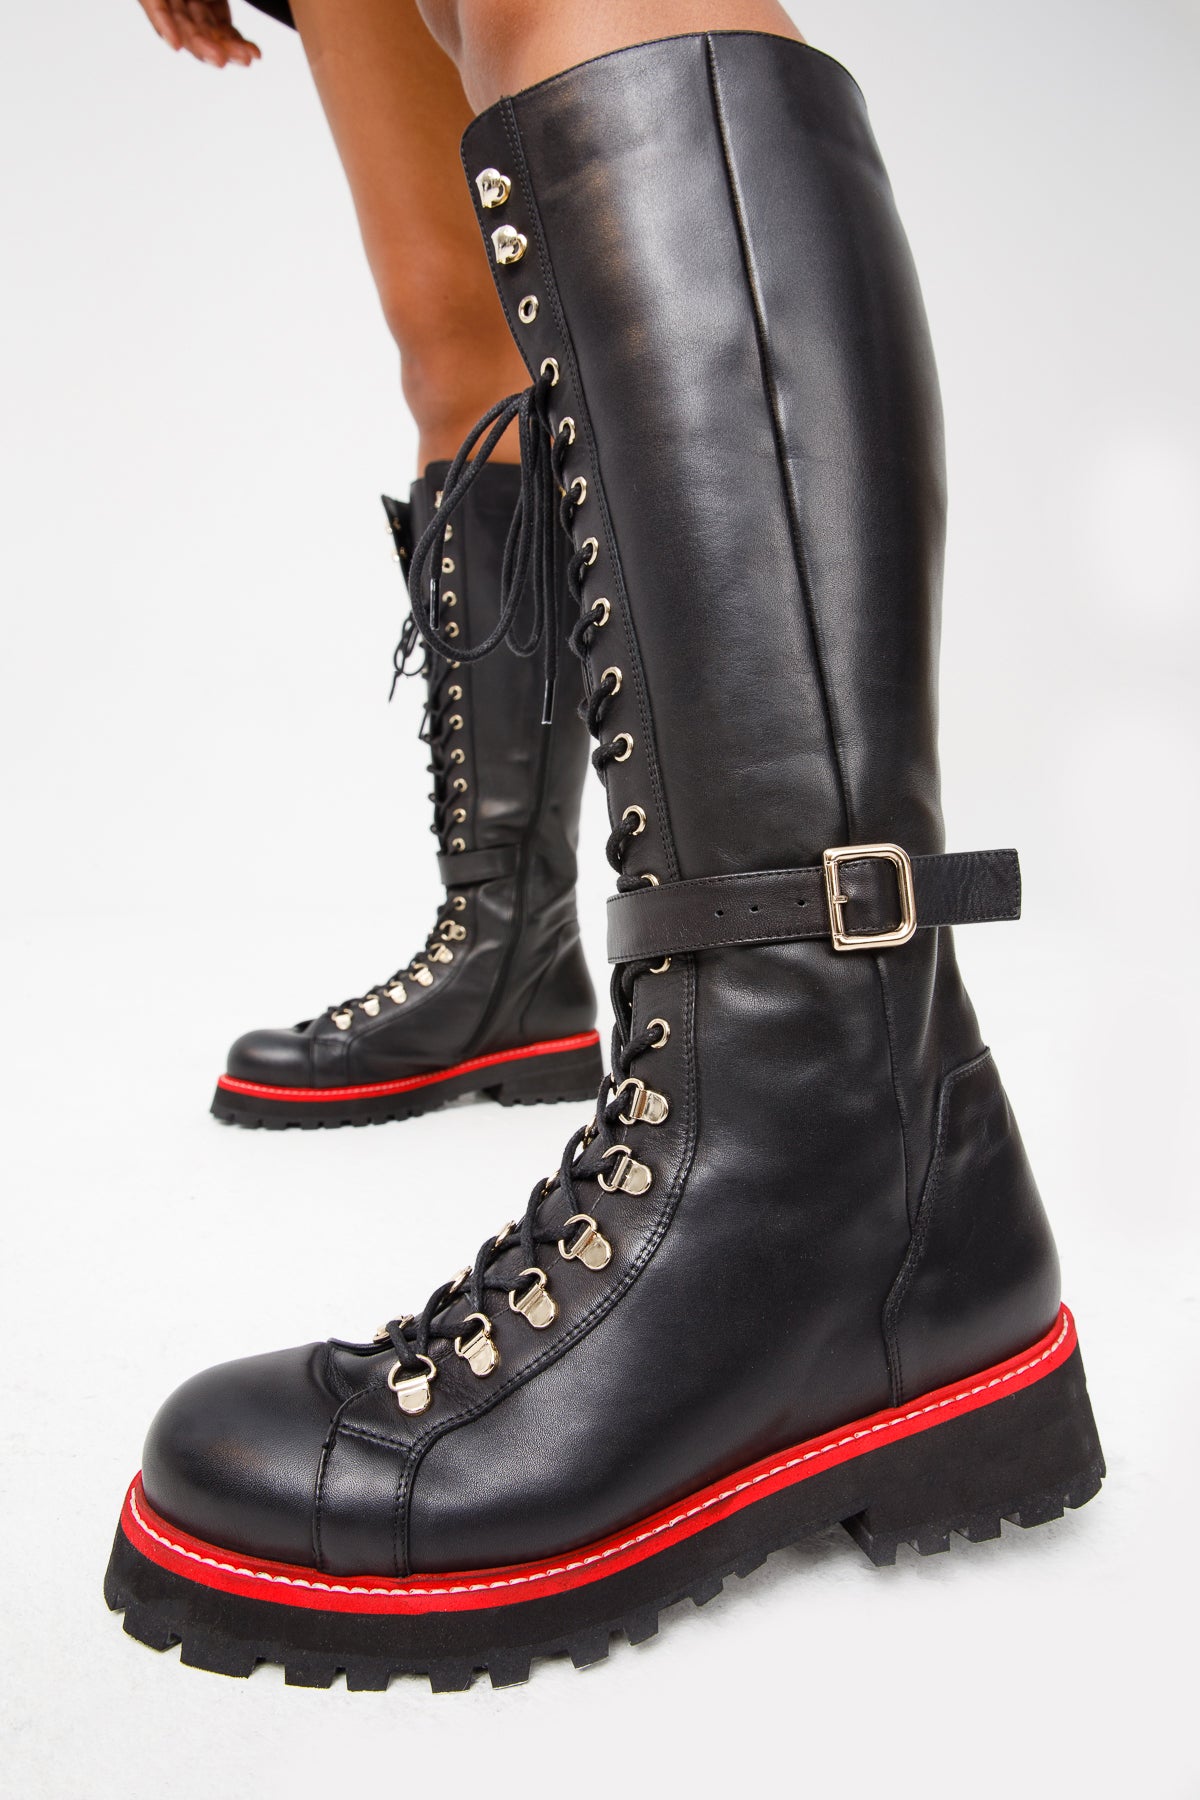 The Istinye Black Leather Knee High Lace-Up Women Boot Limited Edition